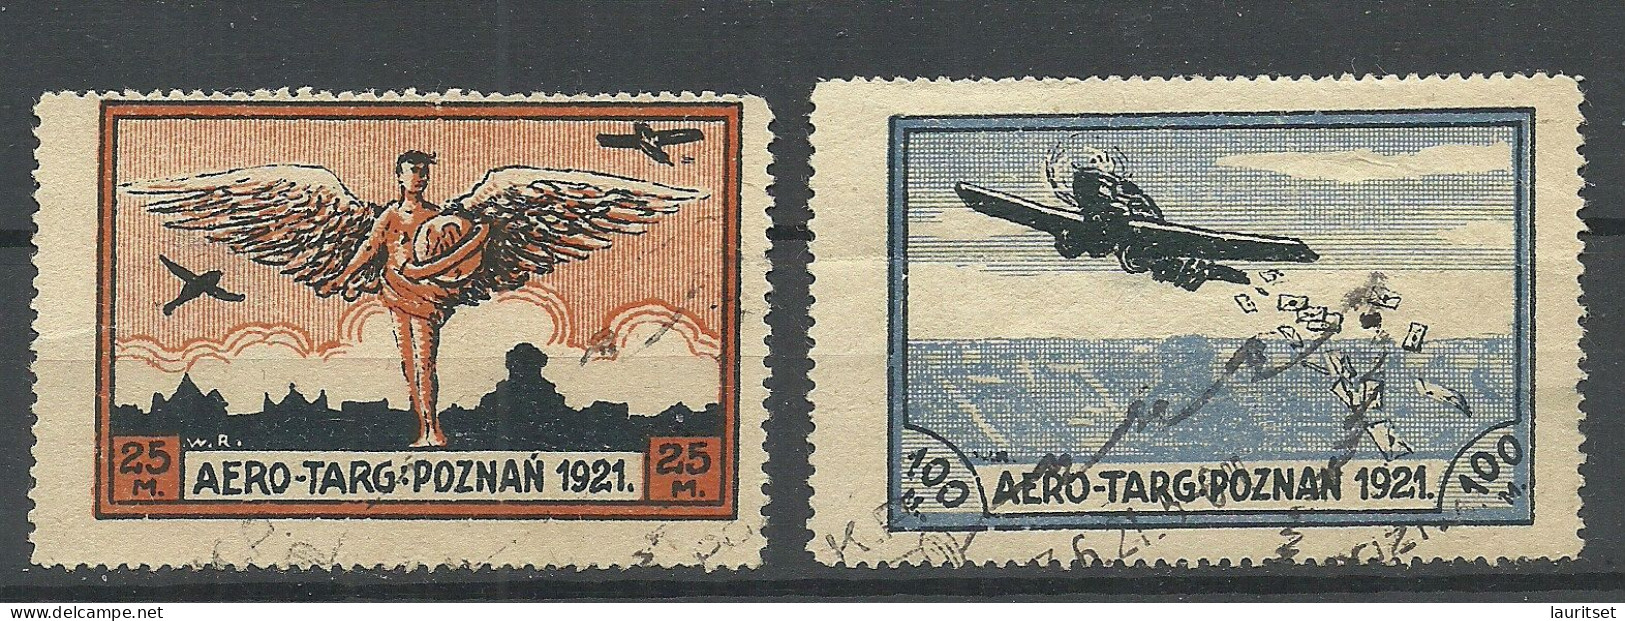 POLEN Poland 1921 Michel I - II Aviation Air Mail Poznan Aero Stamps O NB! Faults! Thinned Places! - Usados